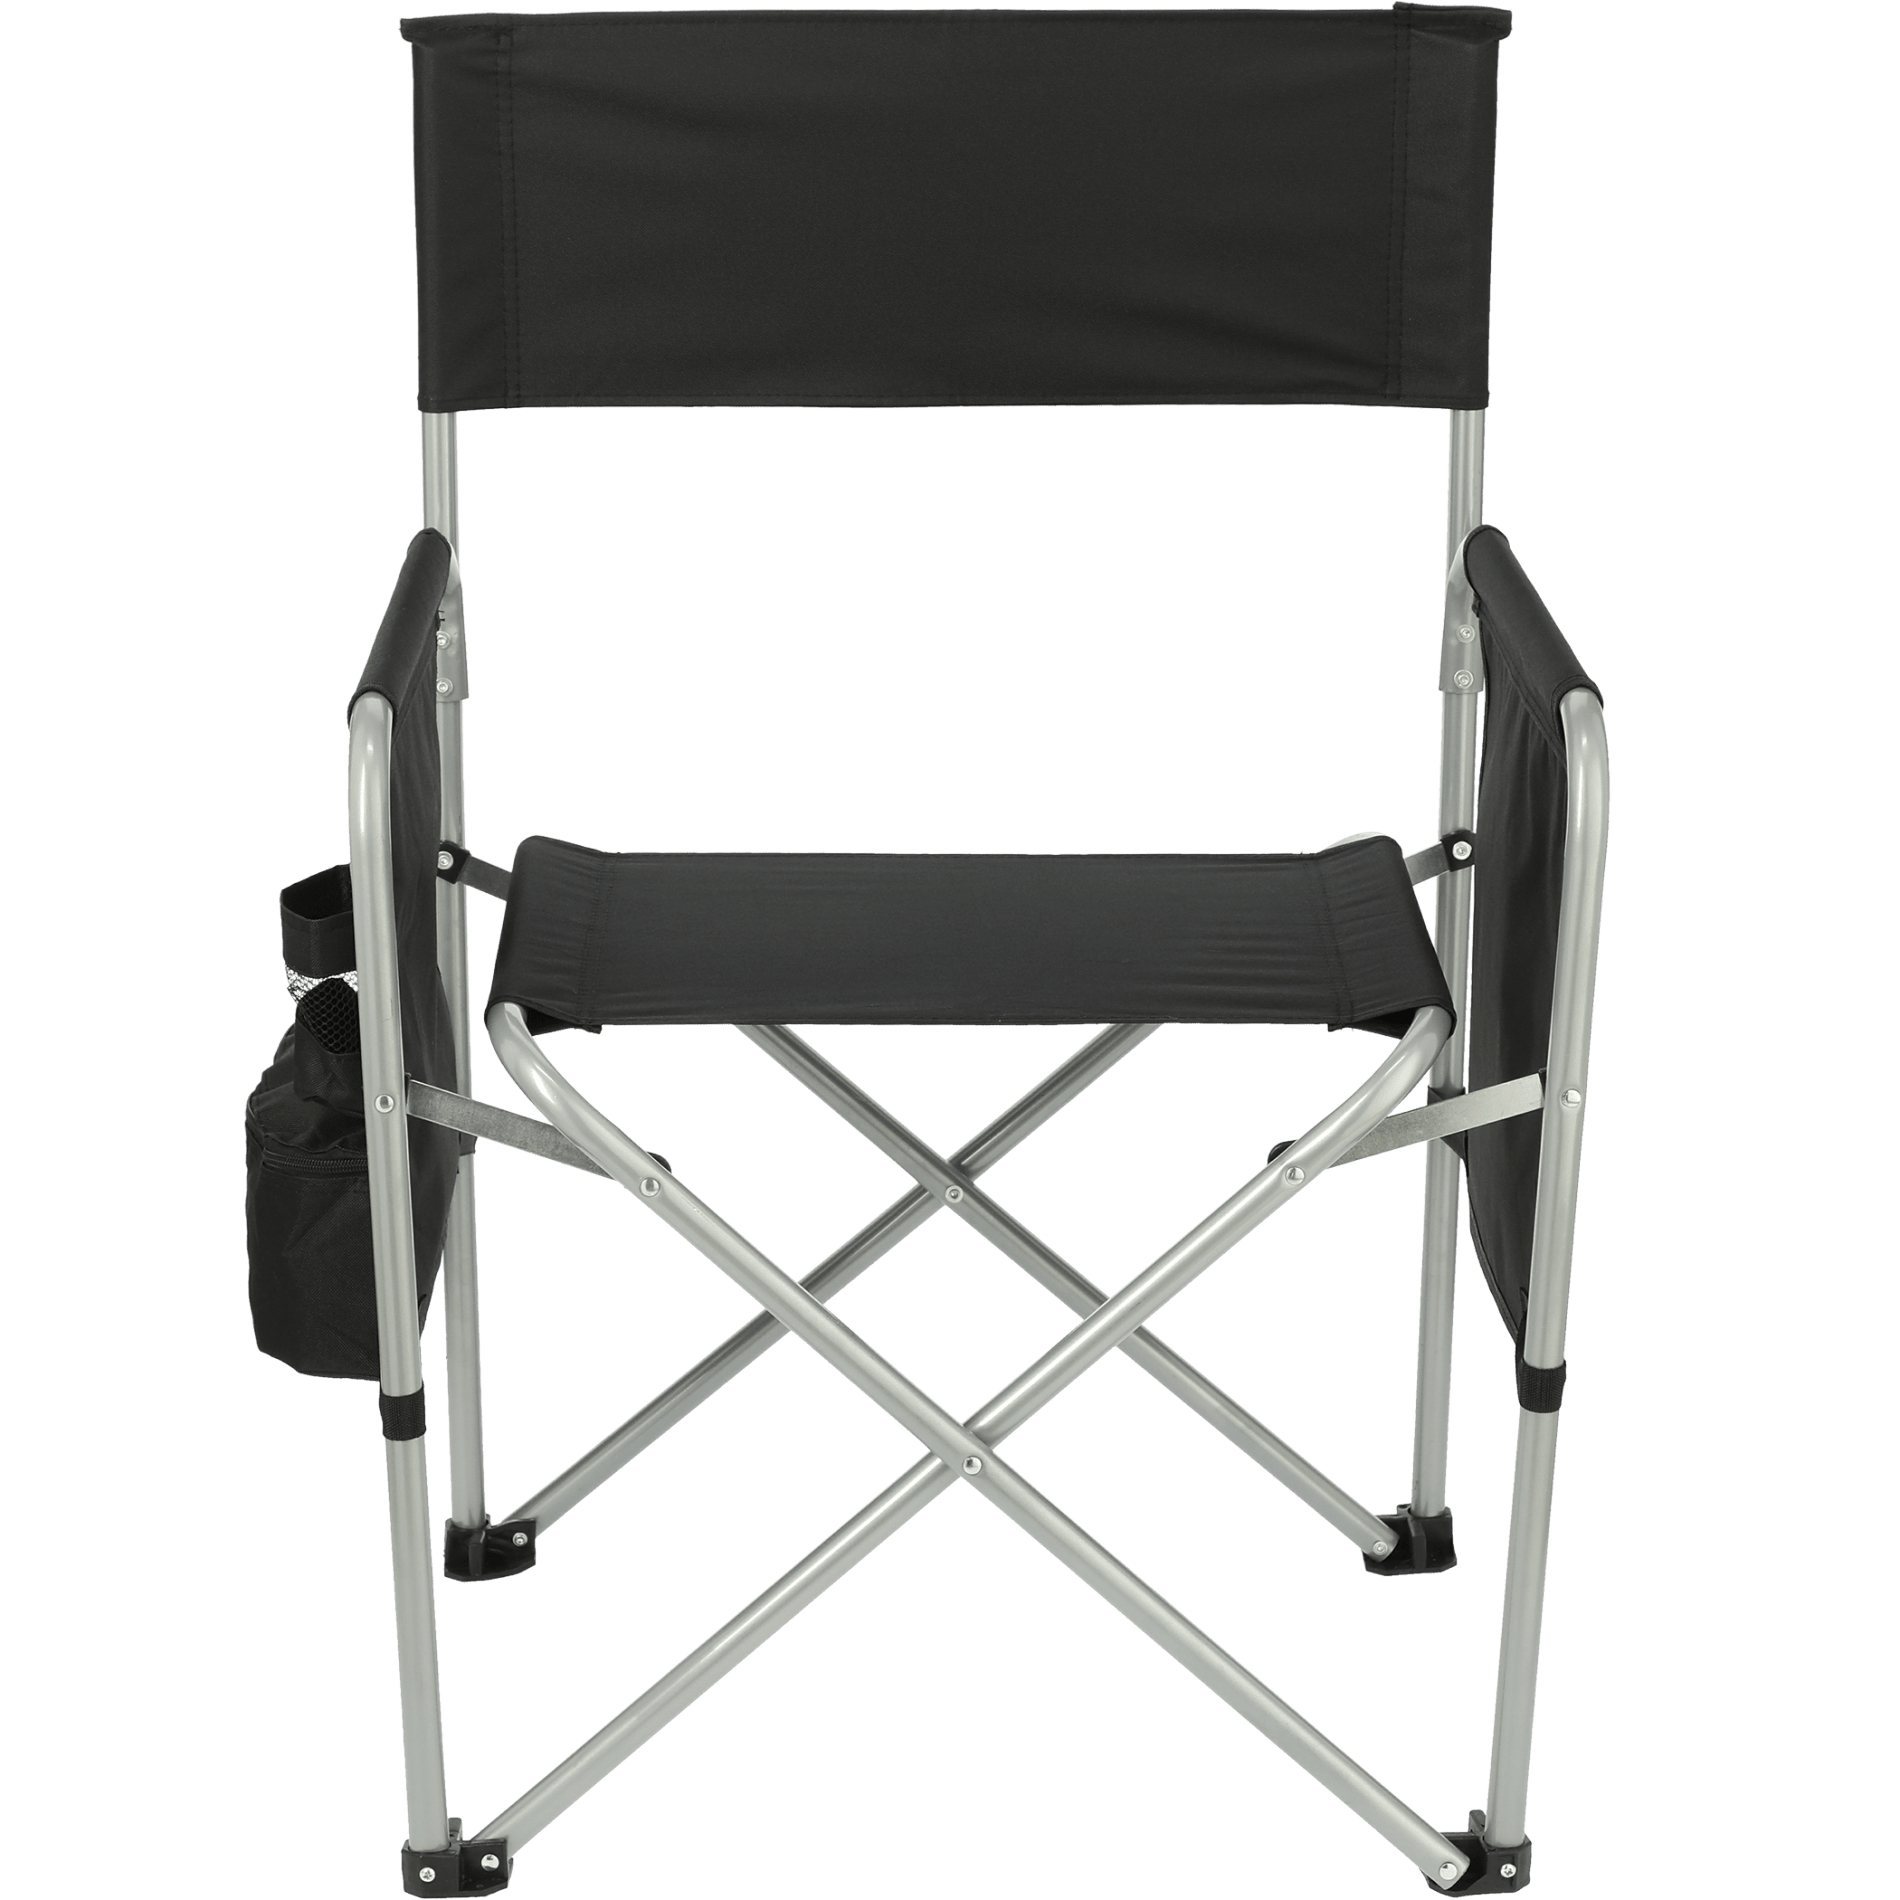 What are the benefits of folding chairs?